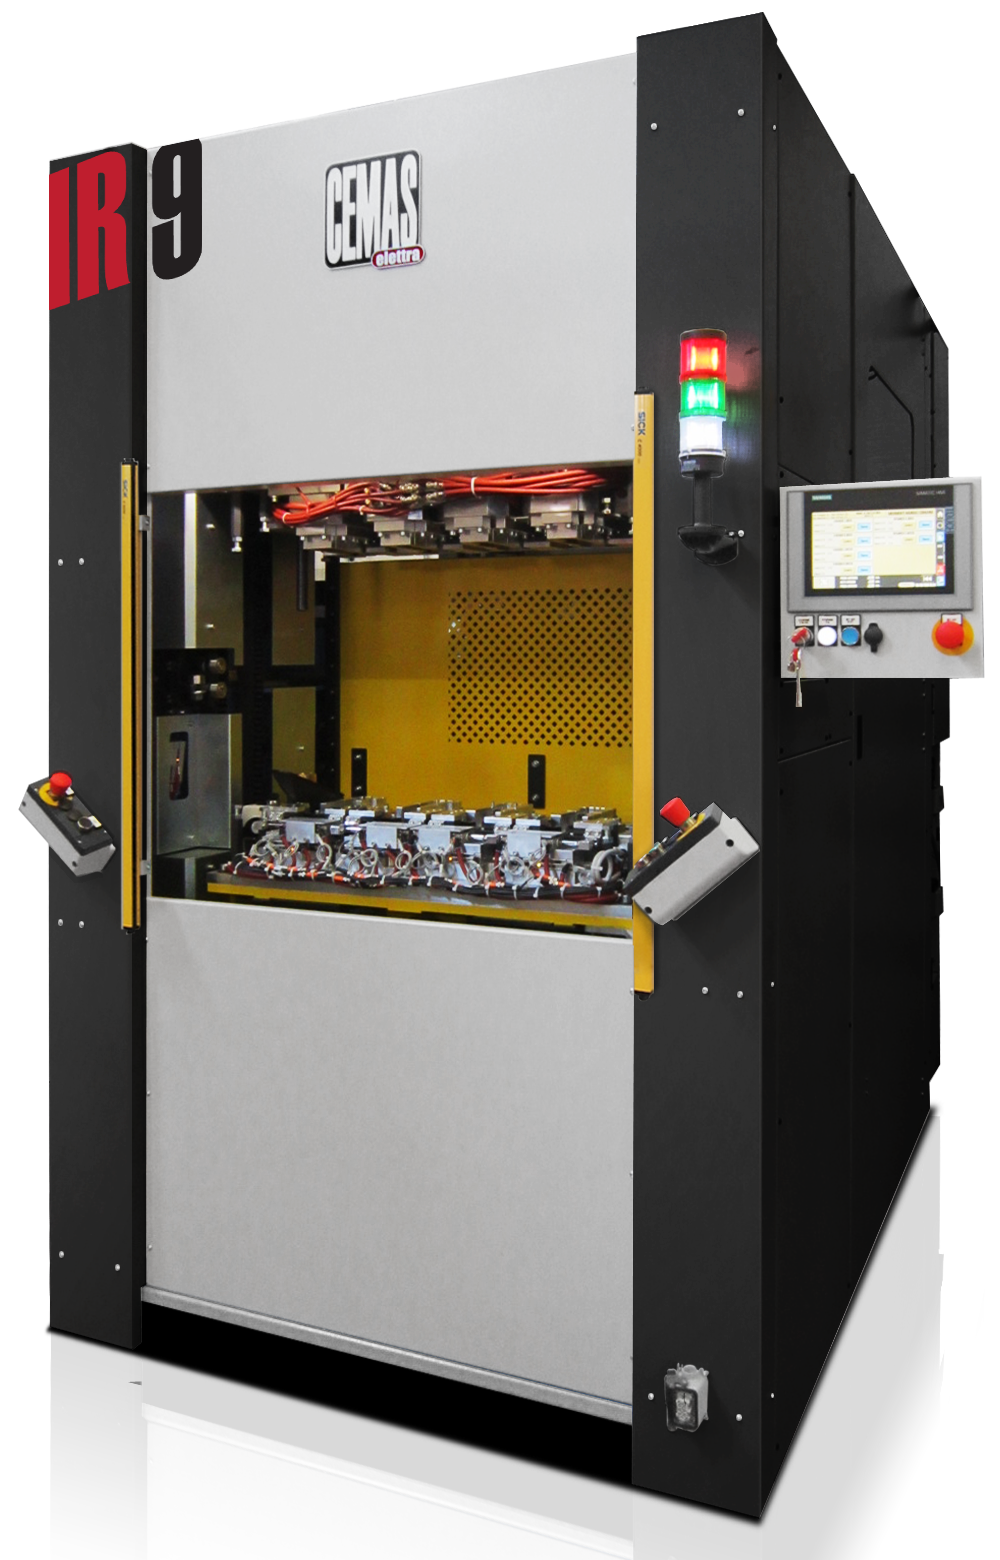 Manufacturers of Highly Reliable Hotplate Welding Machines UK